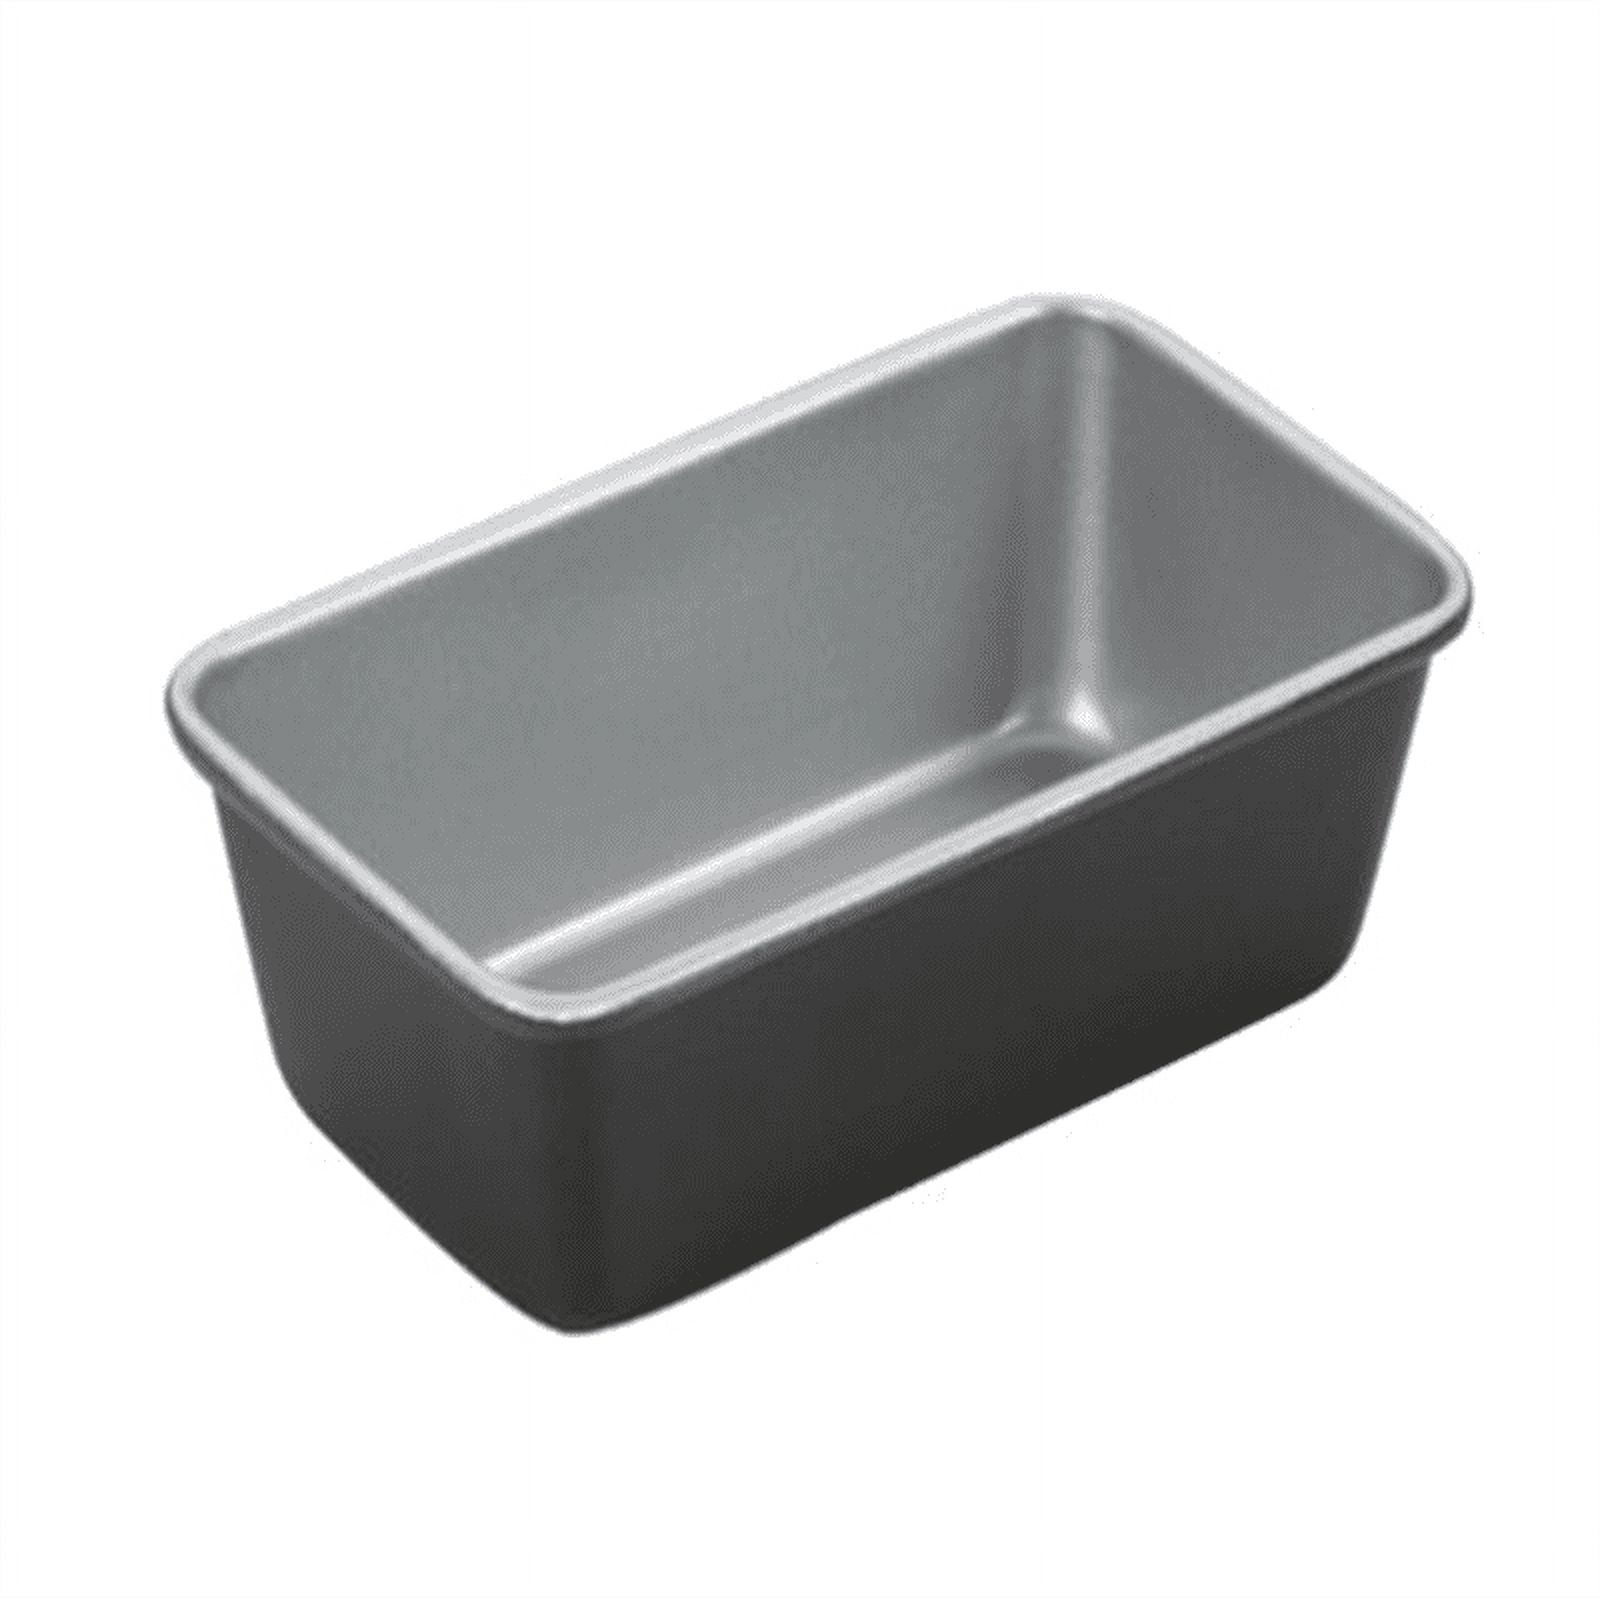 Cuisinart 13 by 9-Inch Chef's Classic Nonstick Bakeware Cake Pan, Silver